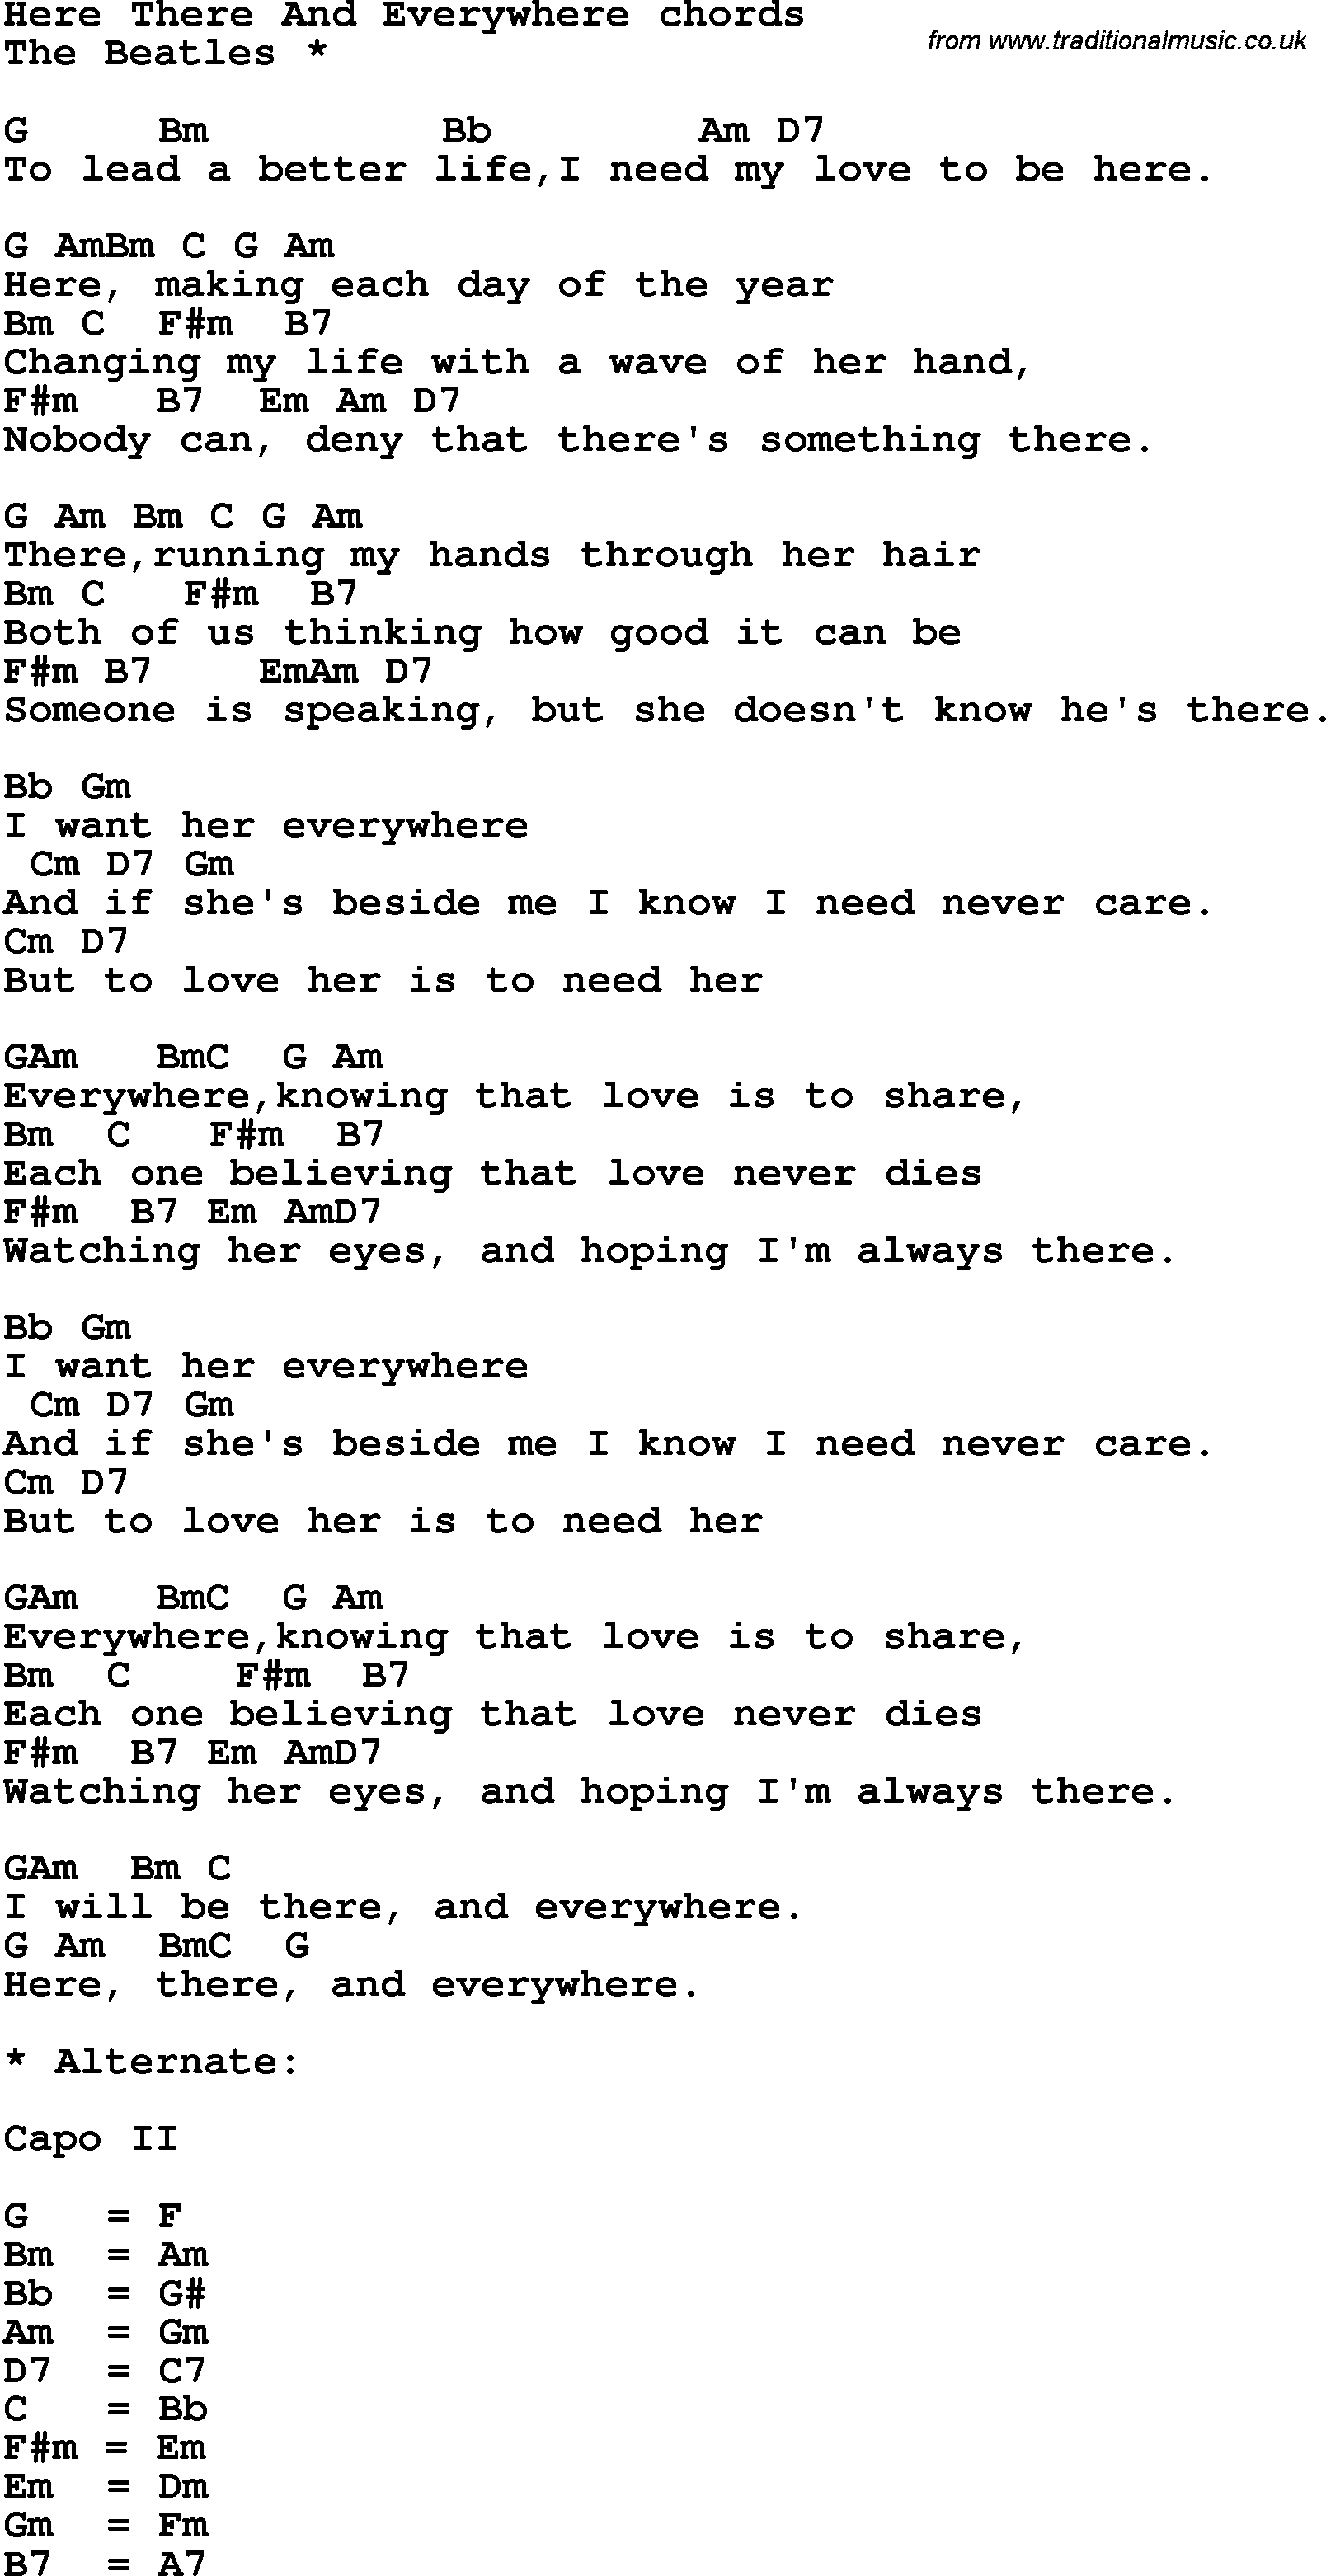 Song Lyrics with guitar chords for Here There And Everywhere